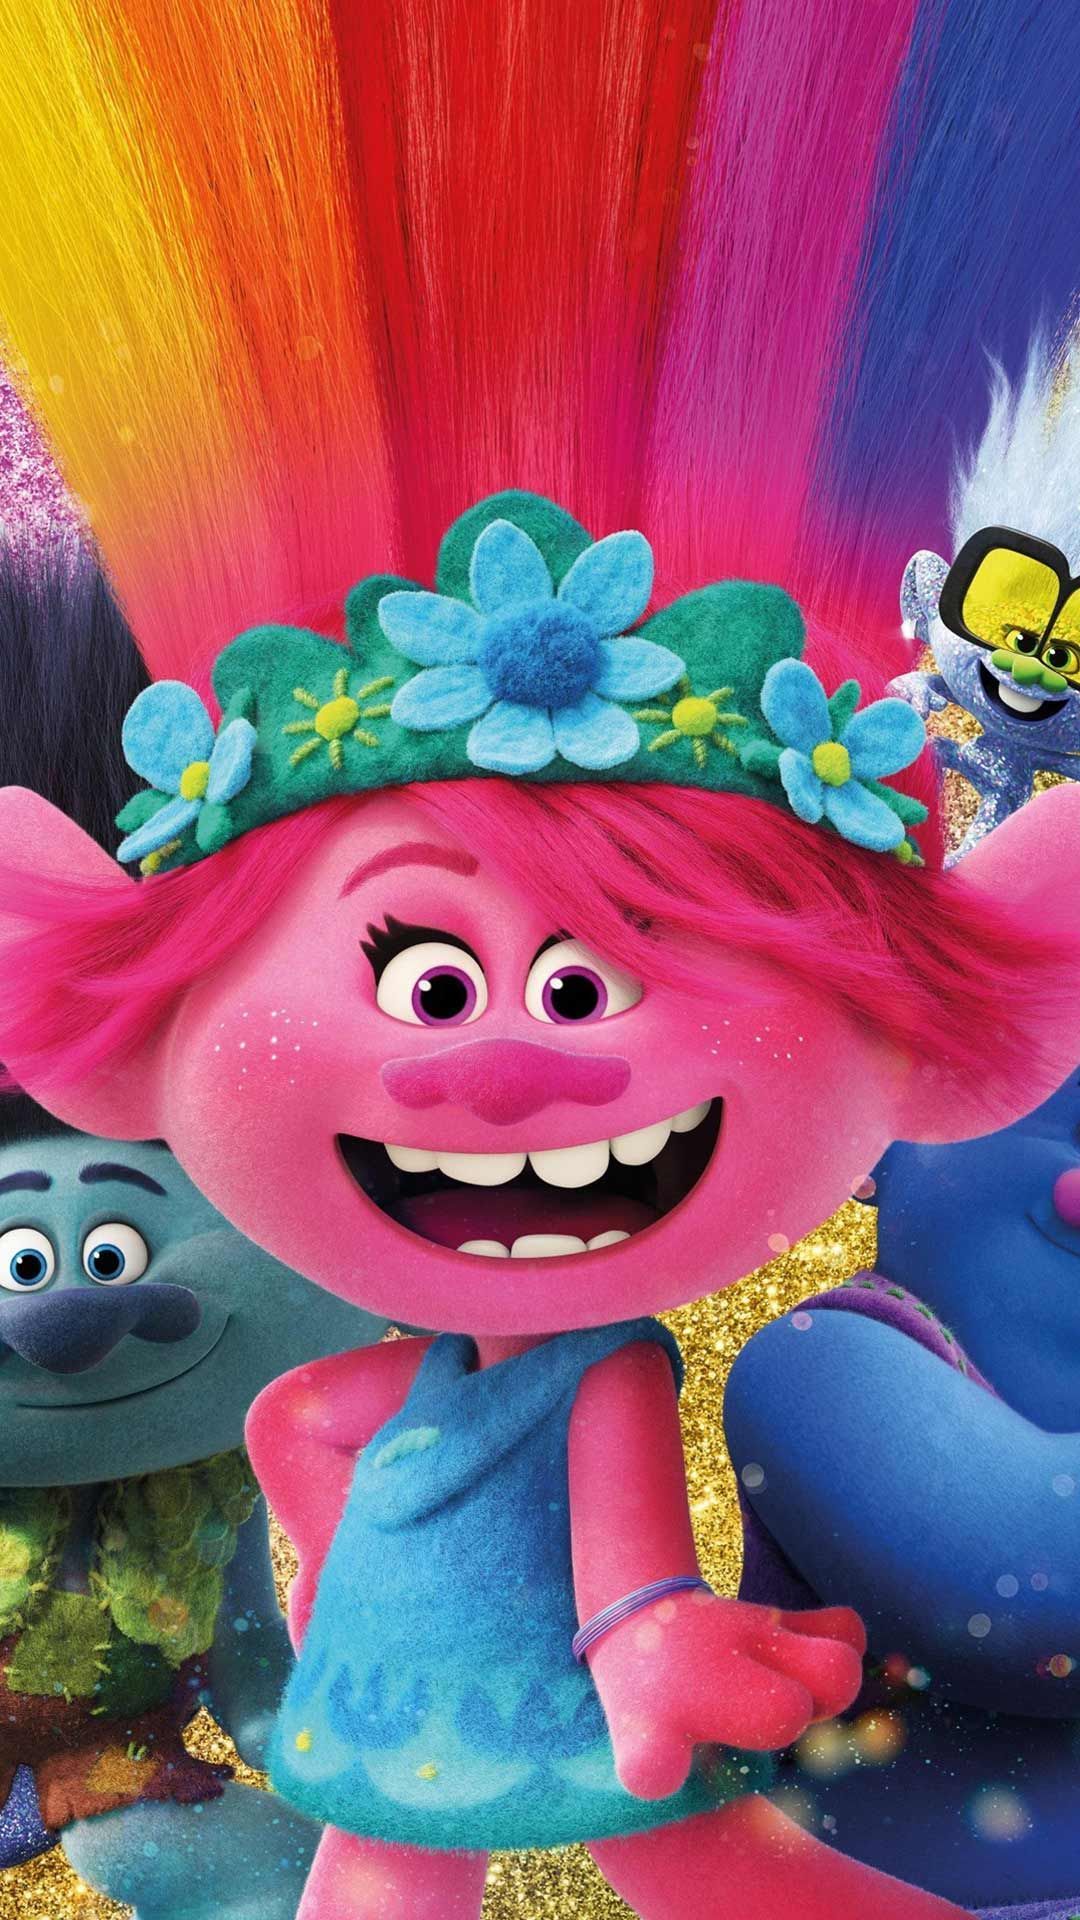 Trolls World Tour wallpaper HD phone background movie Poster Characters for iPhone android screen. Disney phone wallpaper, Movie wallpaper, Disney moana art